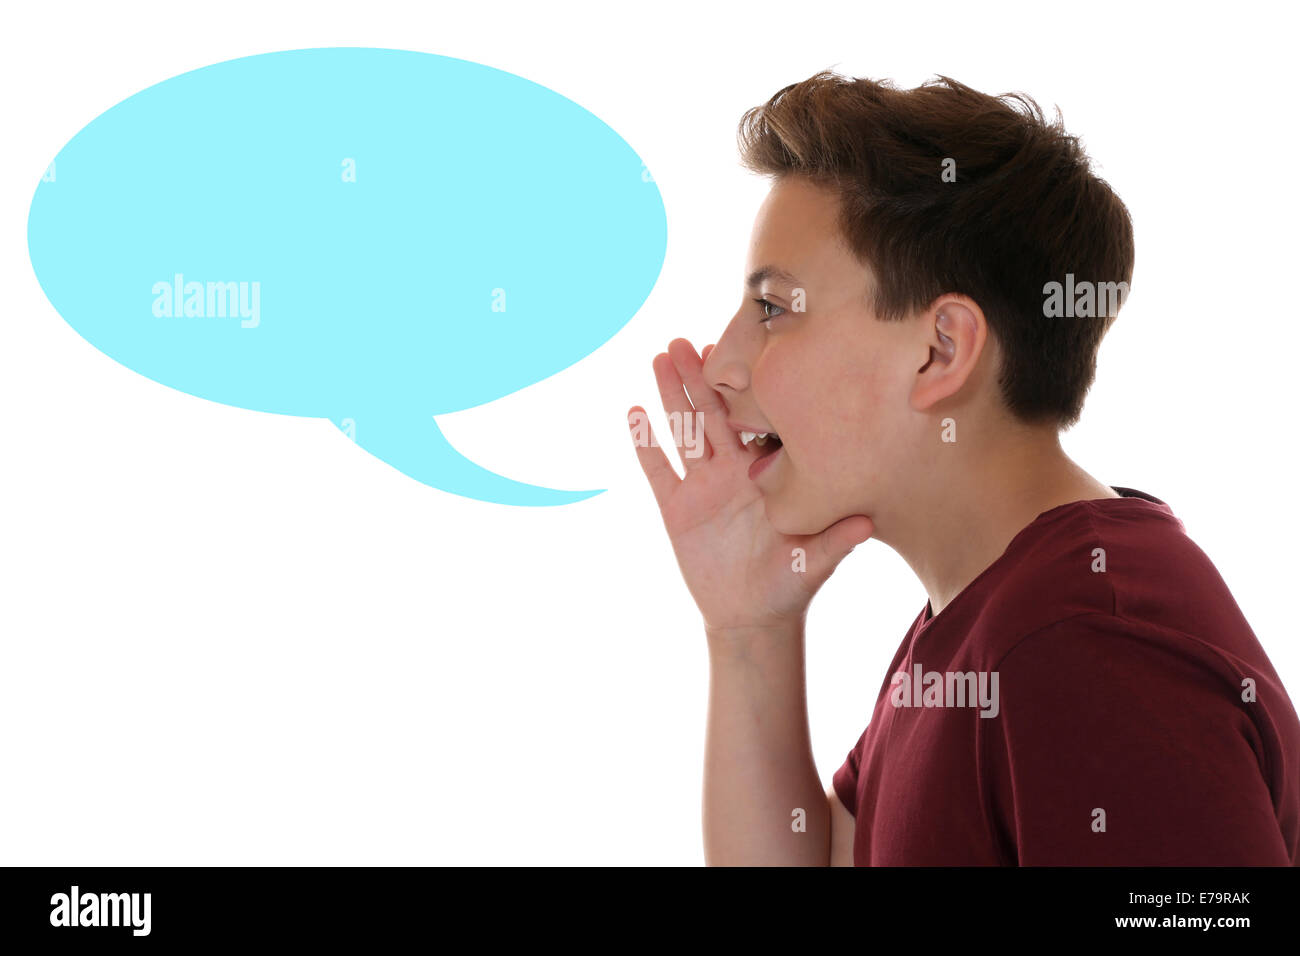 Young boy shouting with speech bubble and copyspace isolated on a white background Stock Photo